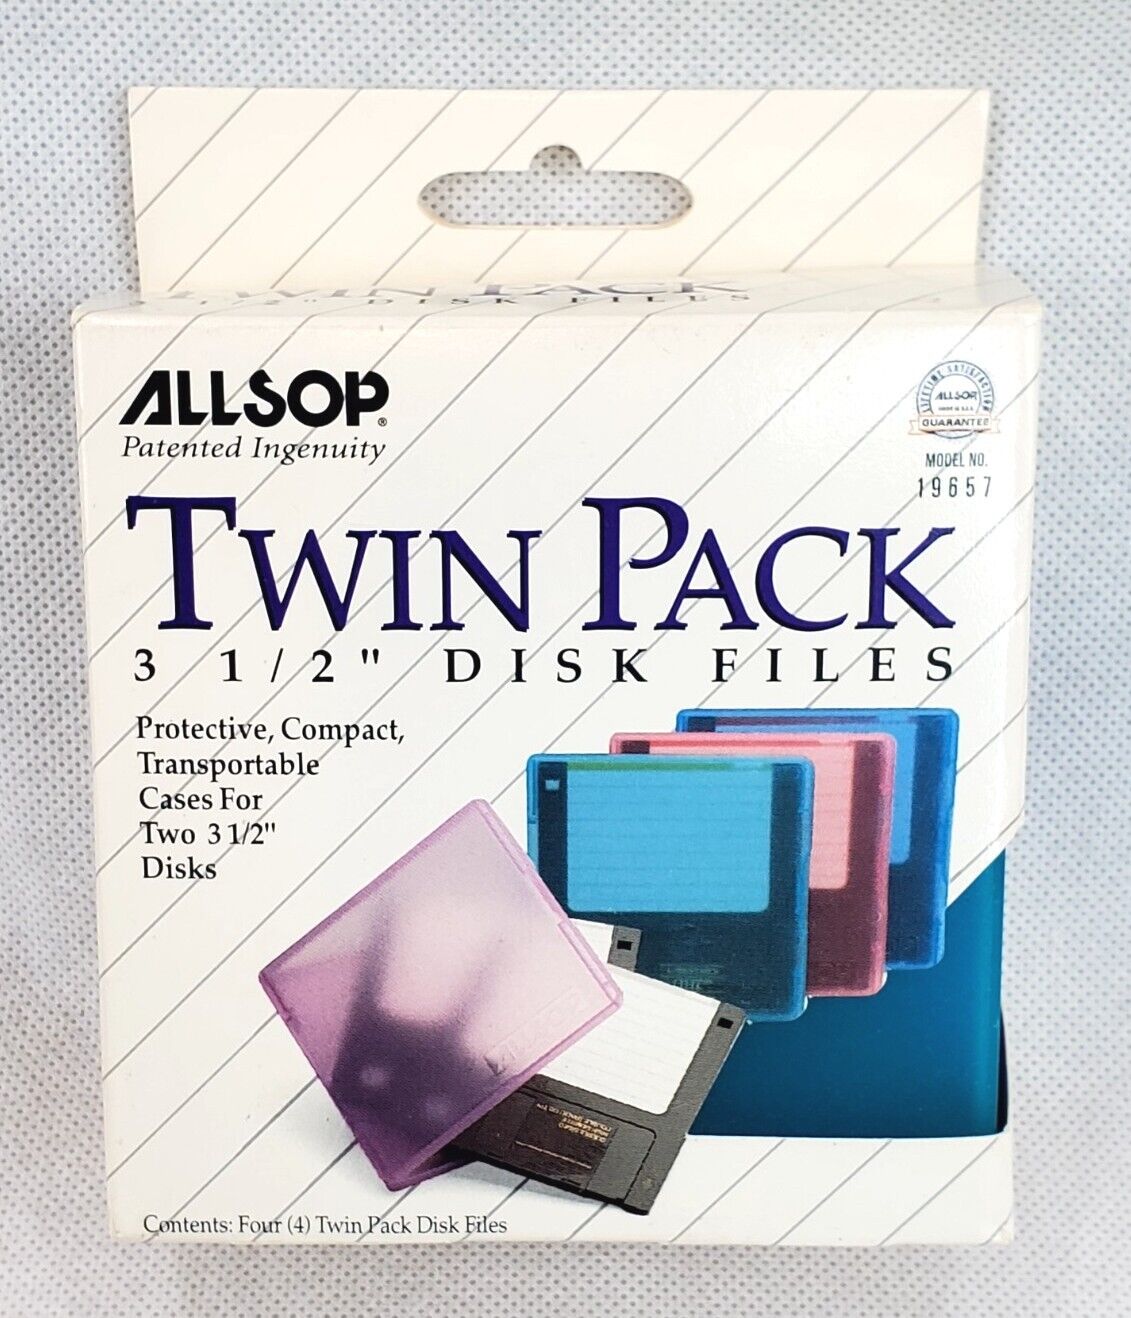 Twin Pack 3 1/2” Disk Files Protective, Compact, Transportable Cases